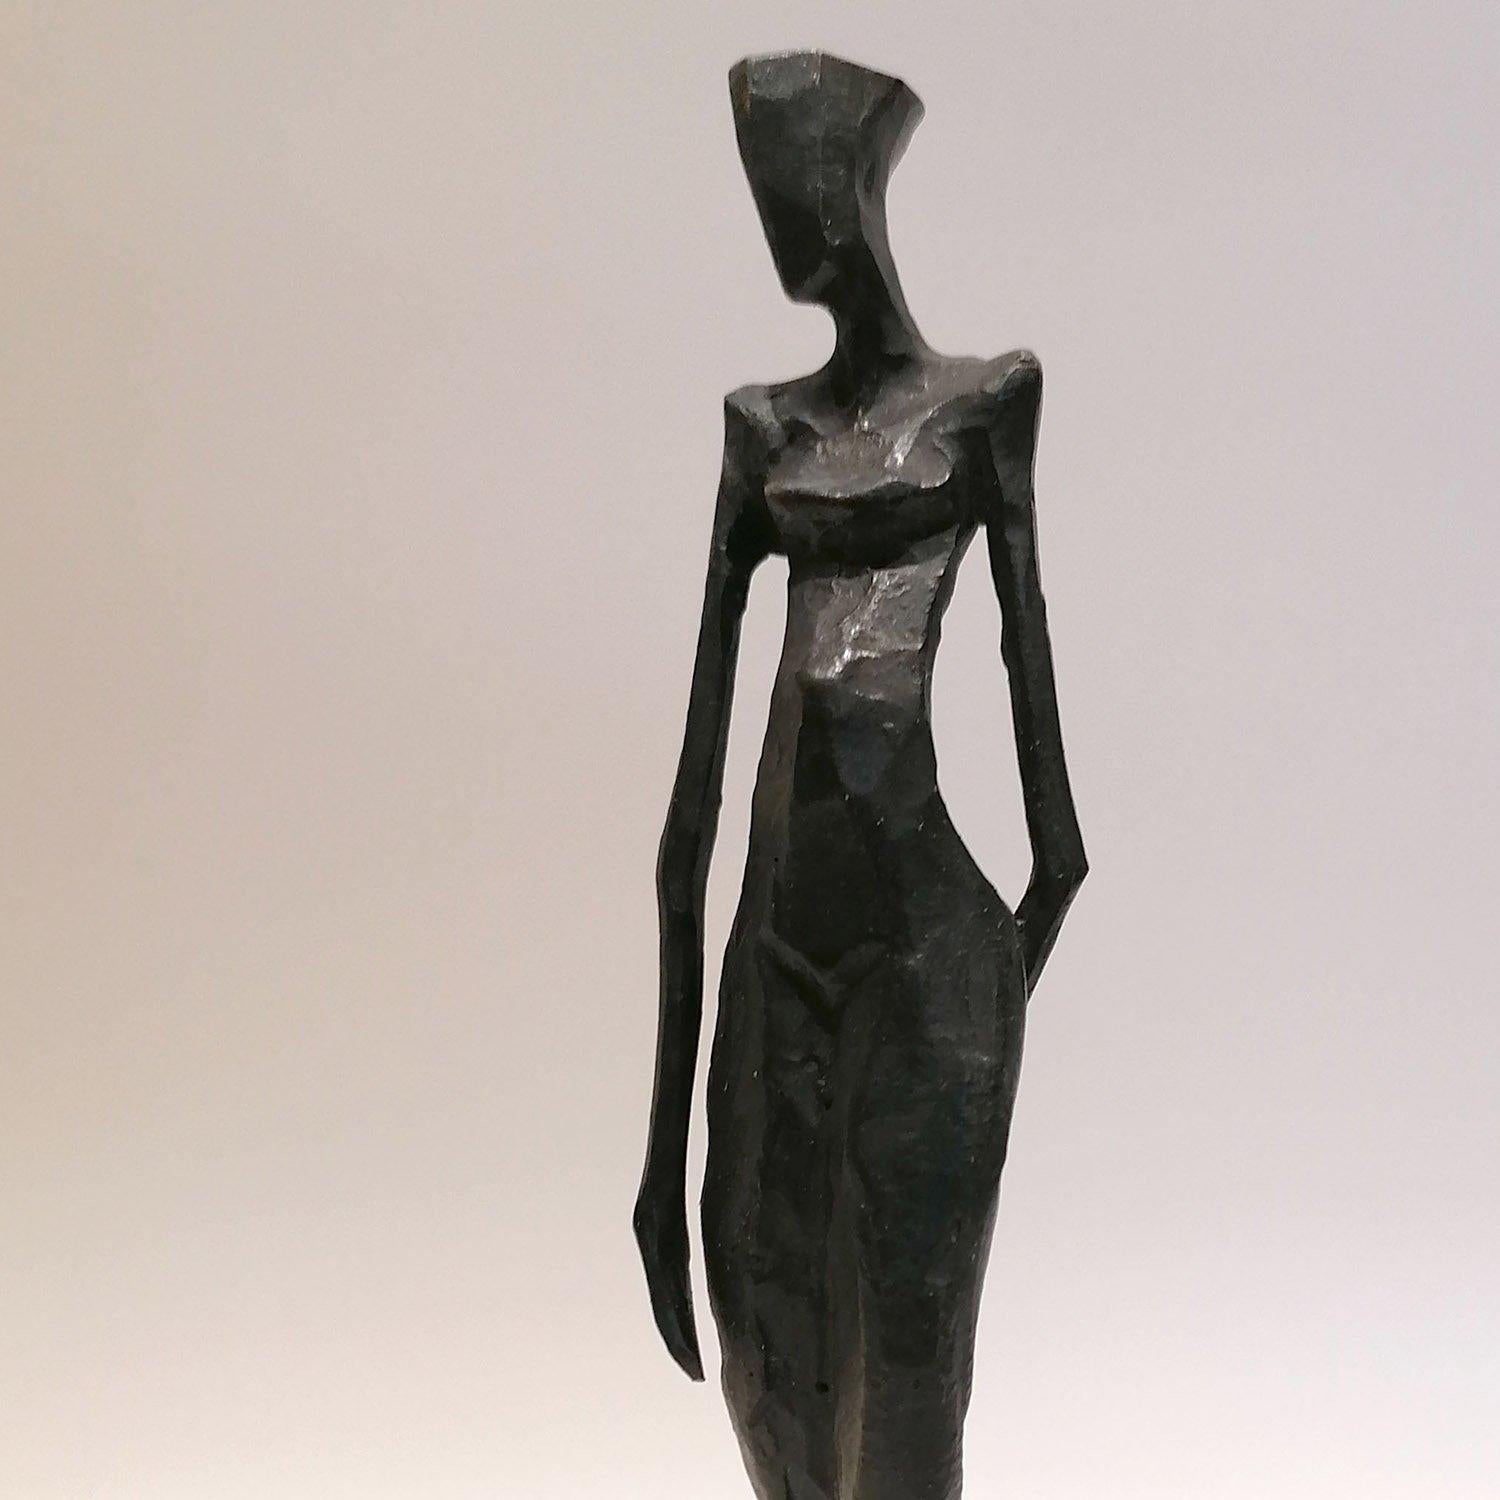 Reni  by Nando Kallweit.  An elegant figurative bronze sculpture of the female form. 

Edition of 25
Dimensions: 21cm tall